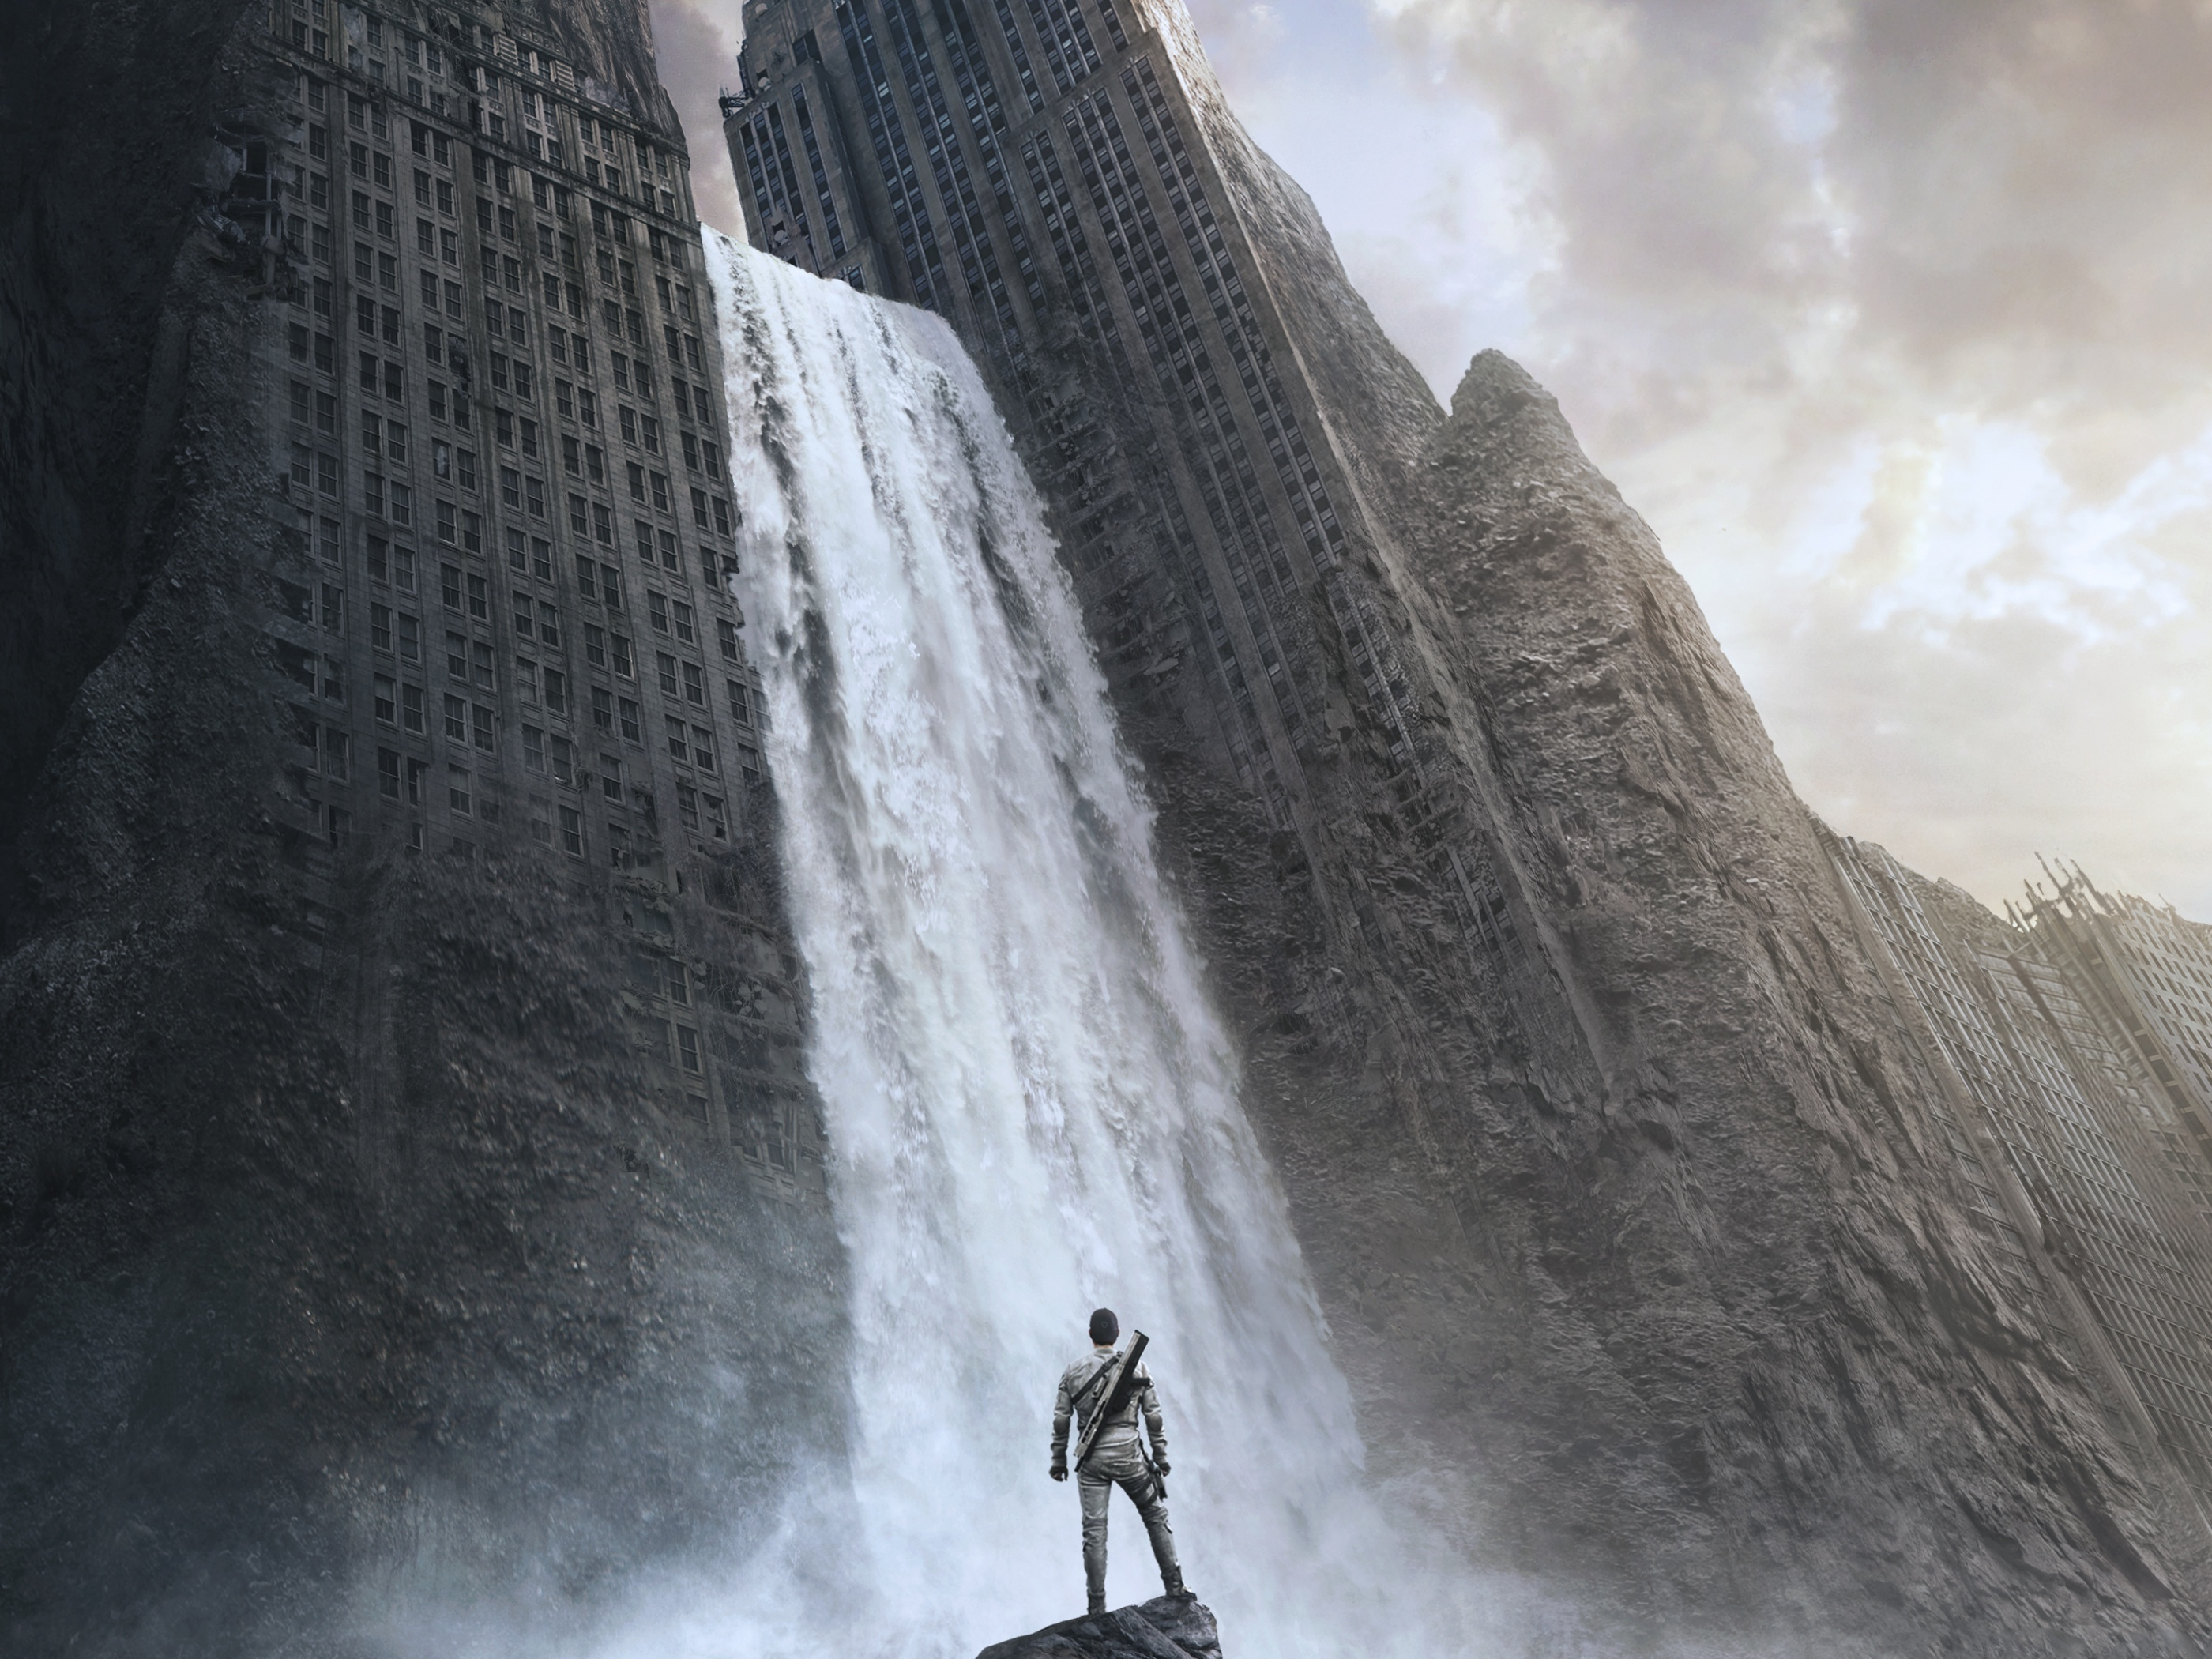 2800x2100 10+ Oblivion (Movie) HD Wallpapers and Backgrounds